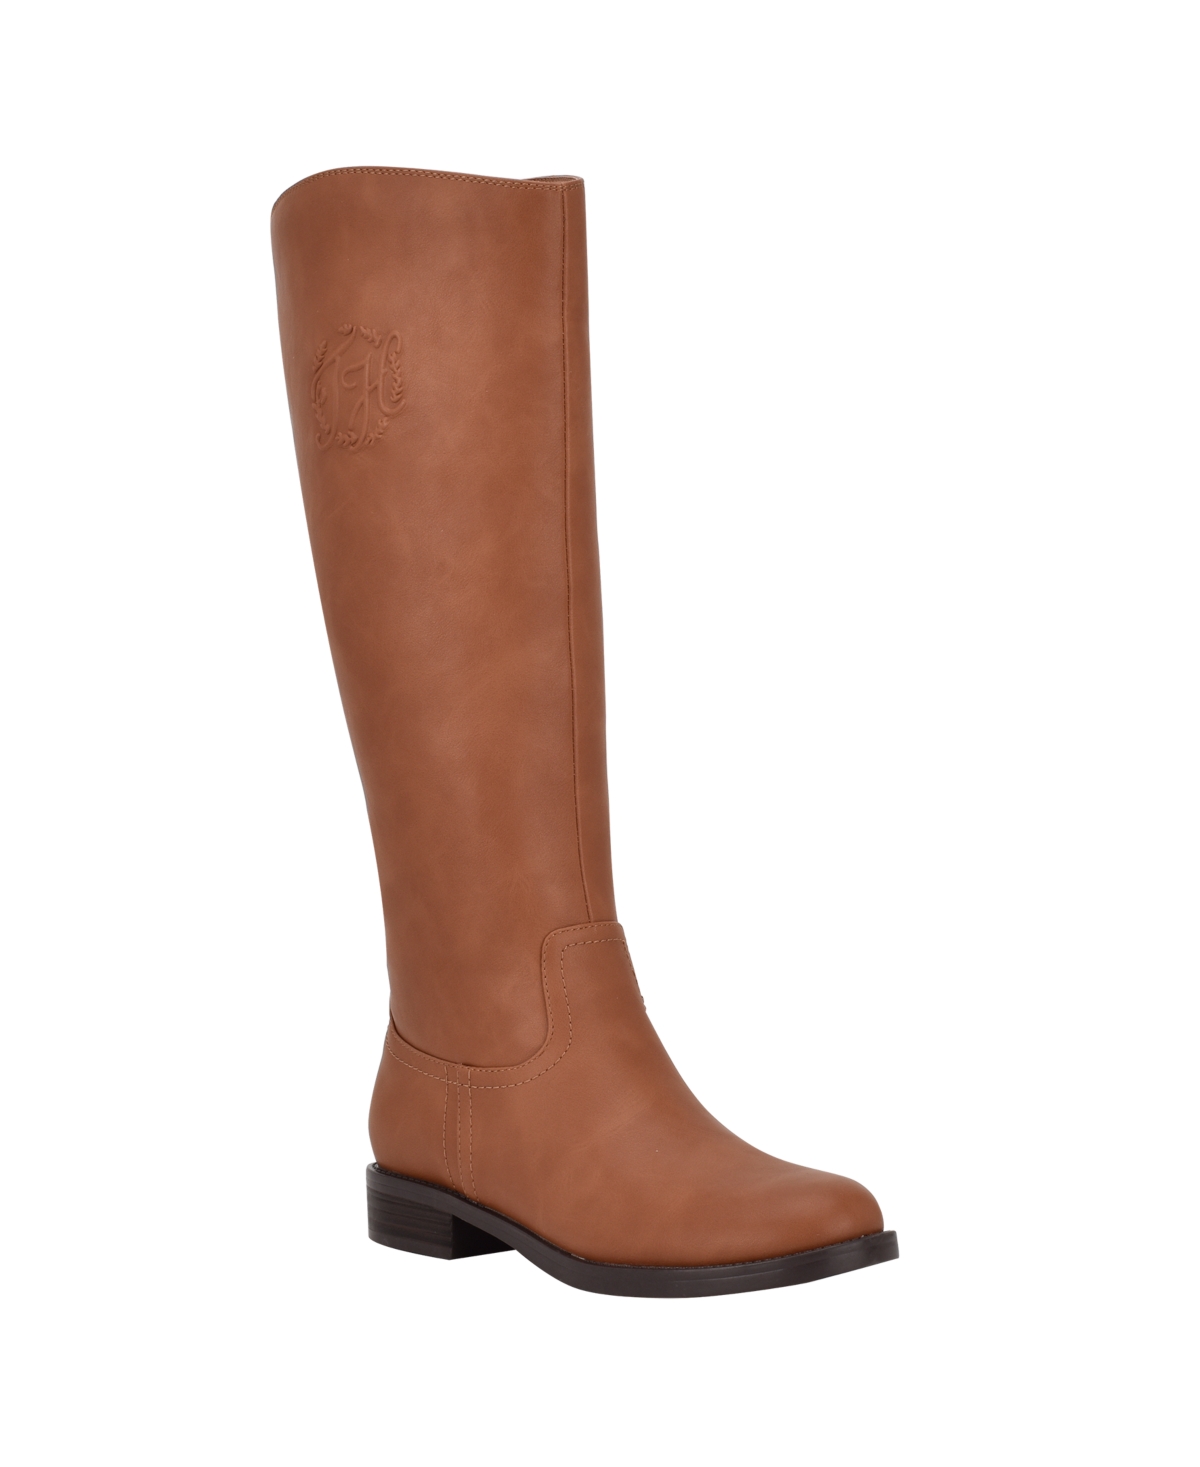 UPC 195972921283 product image for Tommy Hilfiger Women's Rydings Riding Boots Women's Shoes | upcitemdb.com